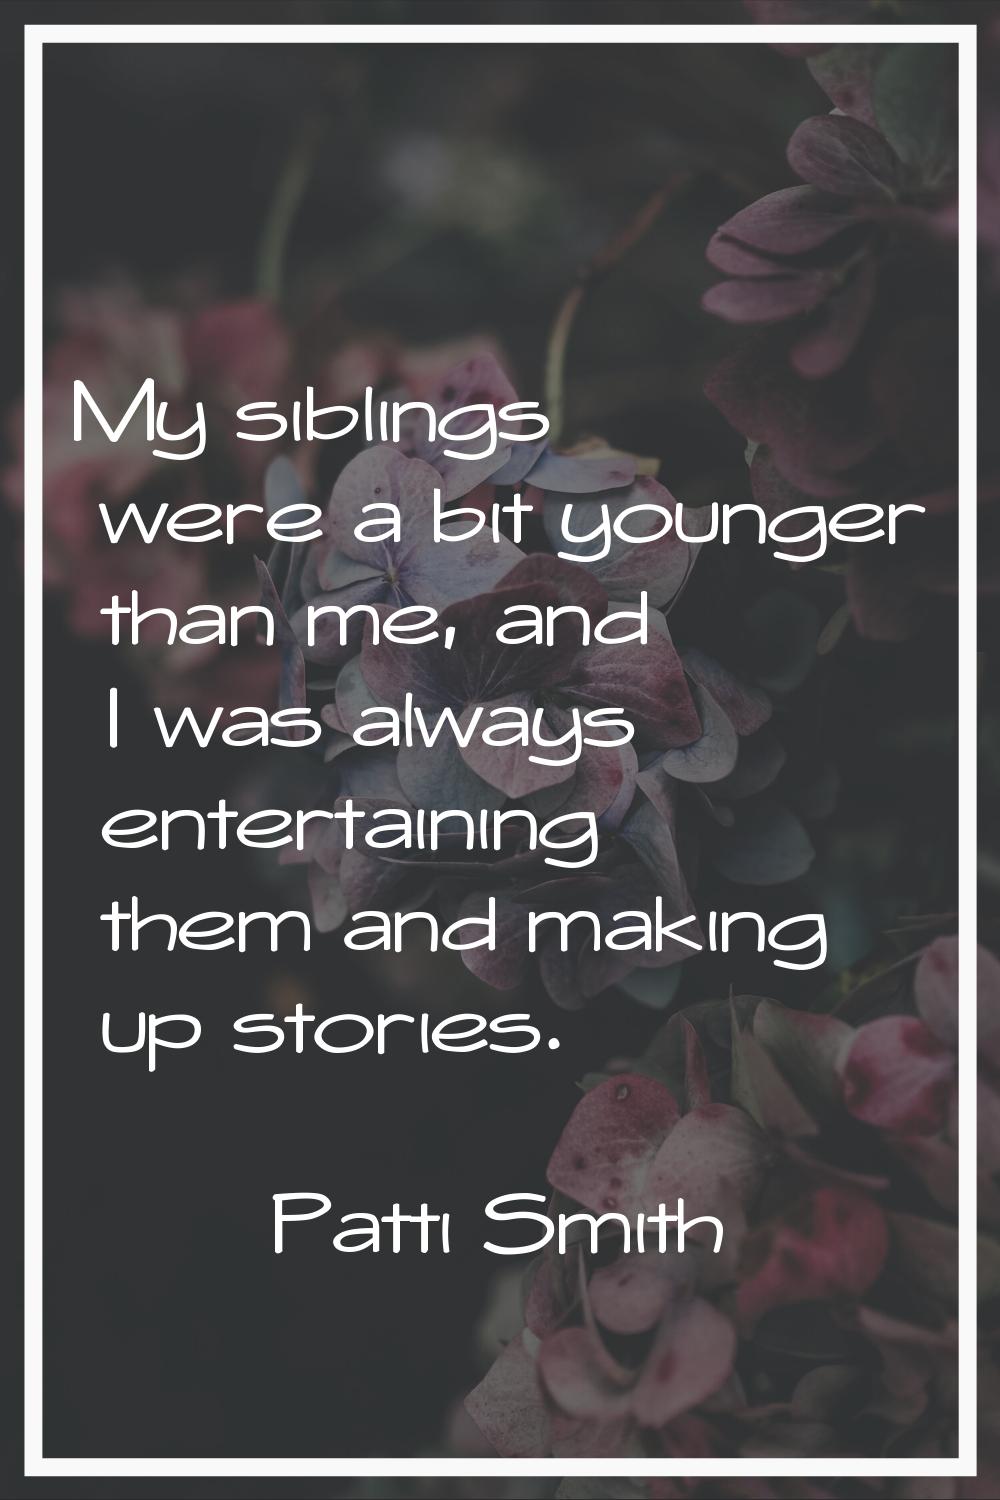 My siblings were a bit younger than me, and I was always entertaining them and making up stories.